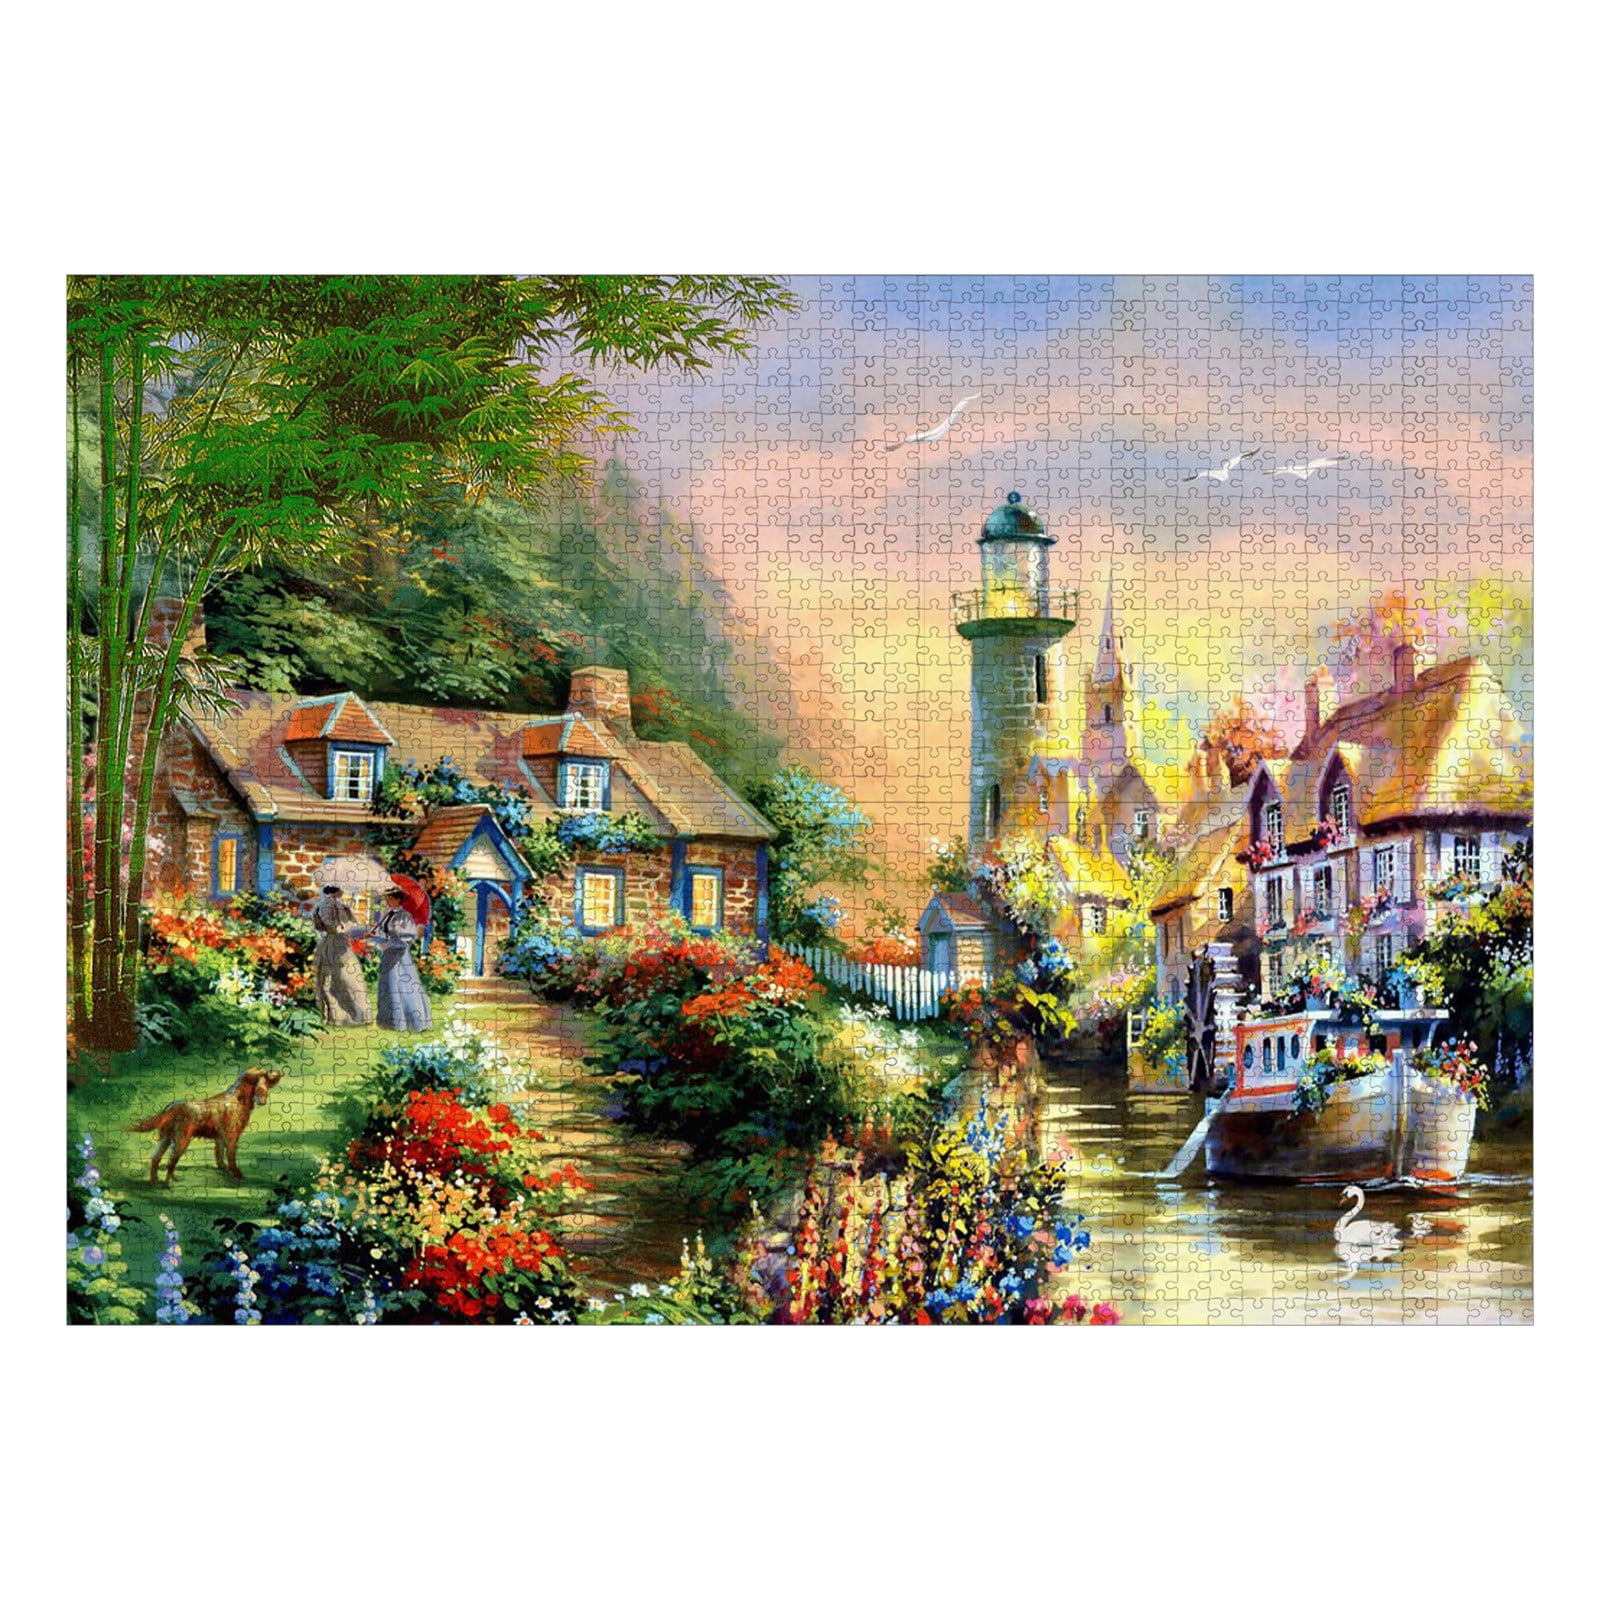 Details about   1000 Piece Animal Landscape Jigsaw Puzzles Adult Family Educational Puzzle Gifts 